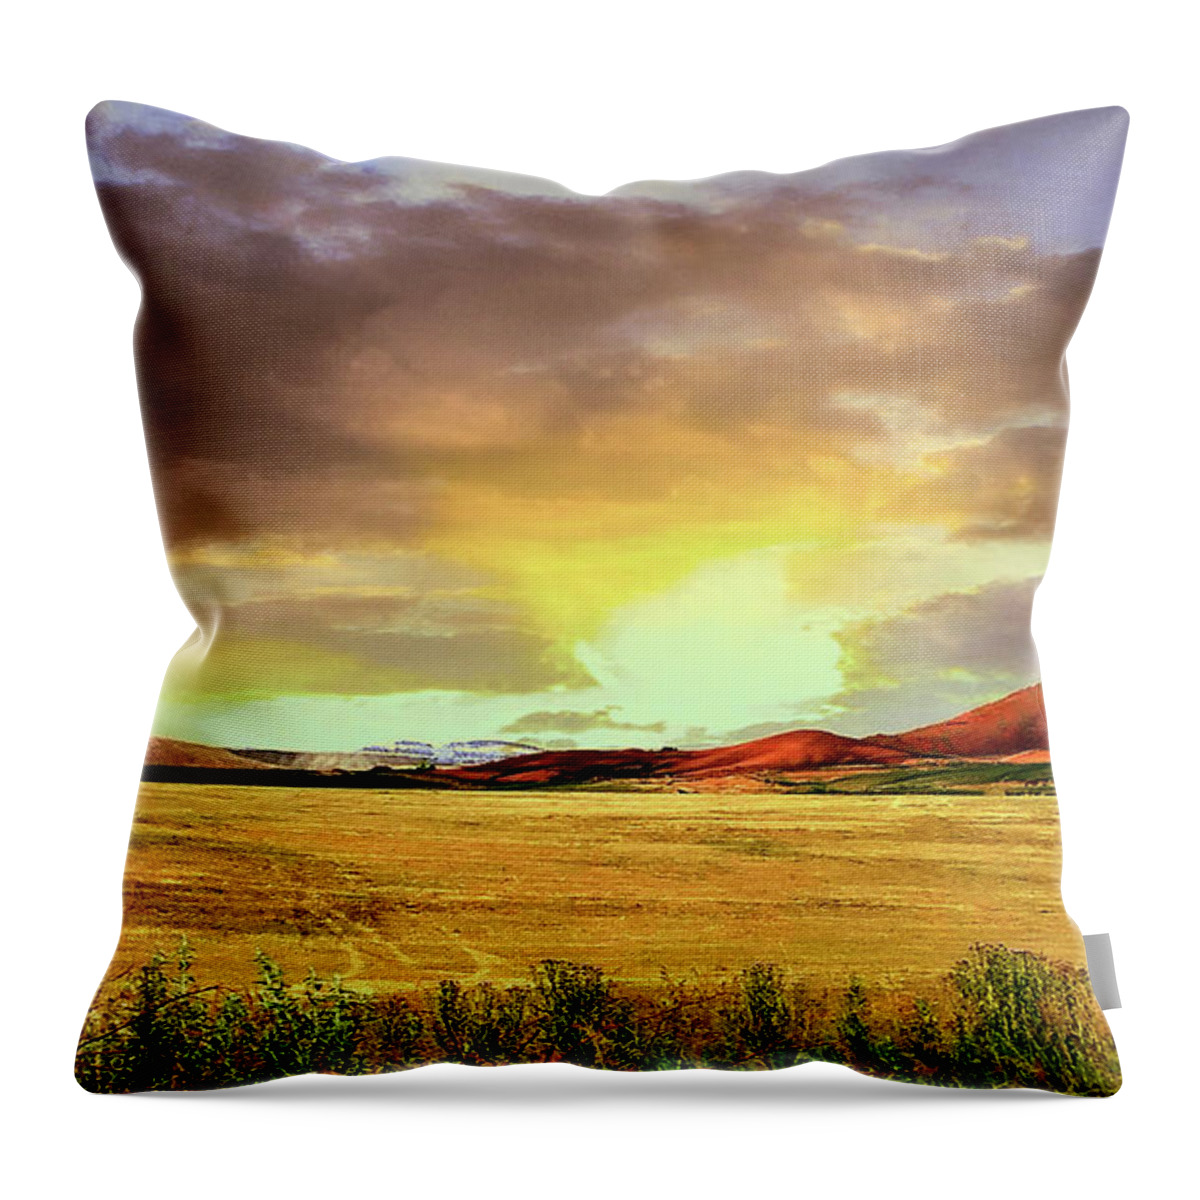 Landscape Throw Pillow featuring the mixed media On The Road by Melinda Firestone-White